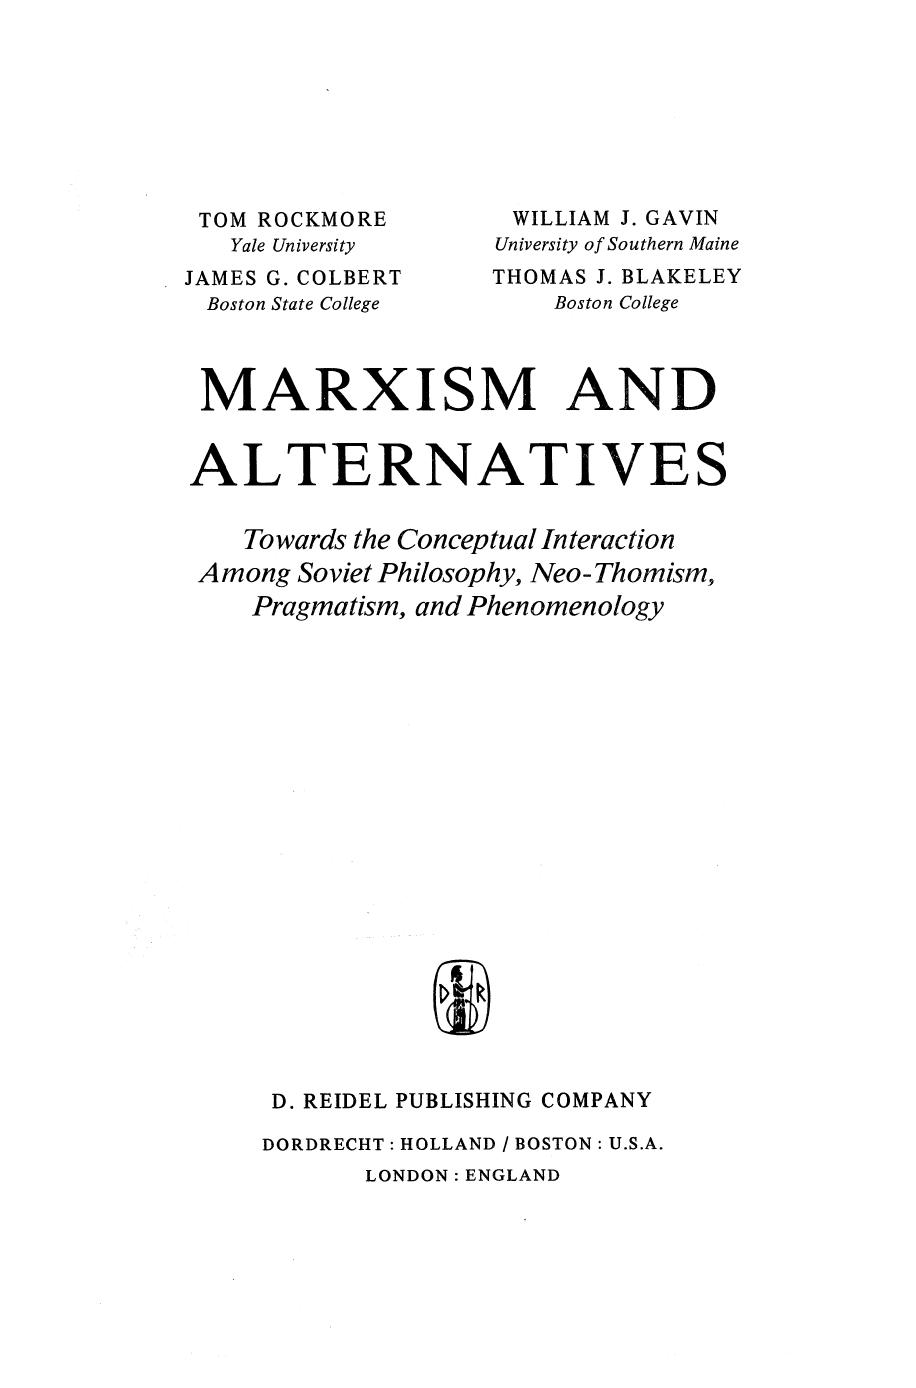 Marxism and Alternatives: Towards the Conceptual Interaction Among Soviet Philosophy, Neo-Thomism, Pragmatism, and Phenomenology